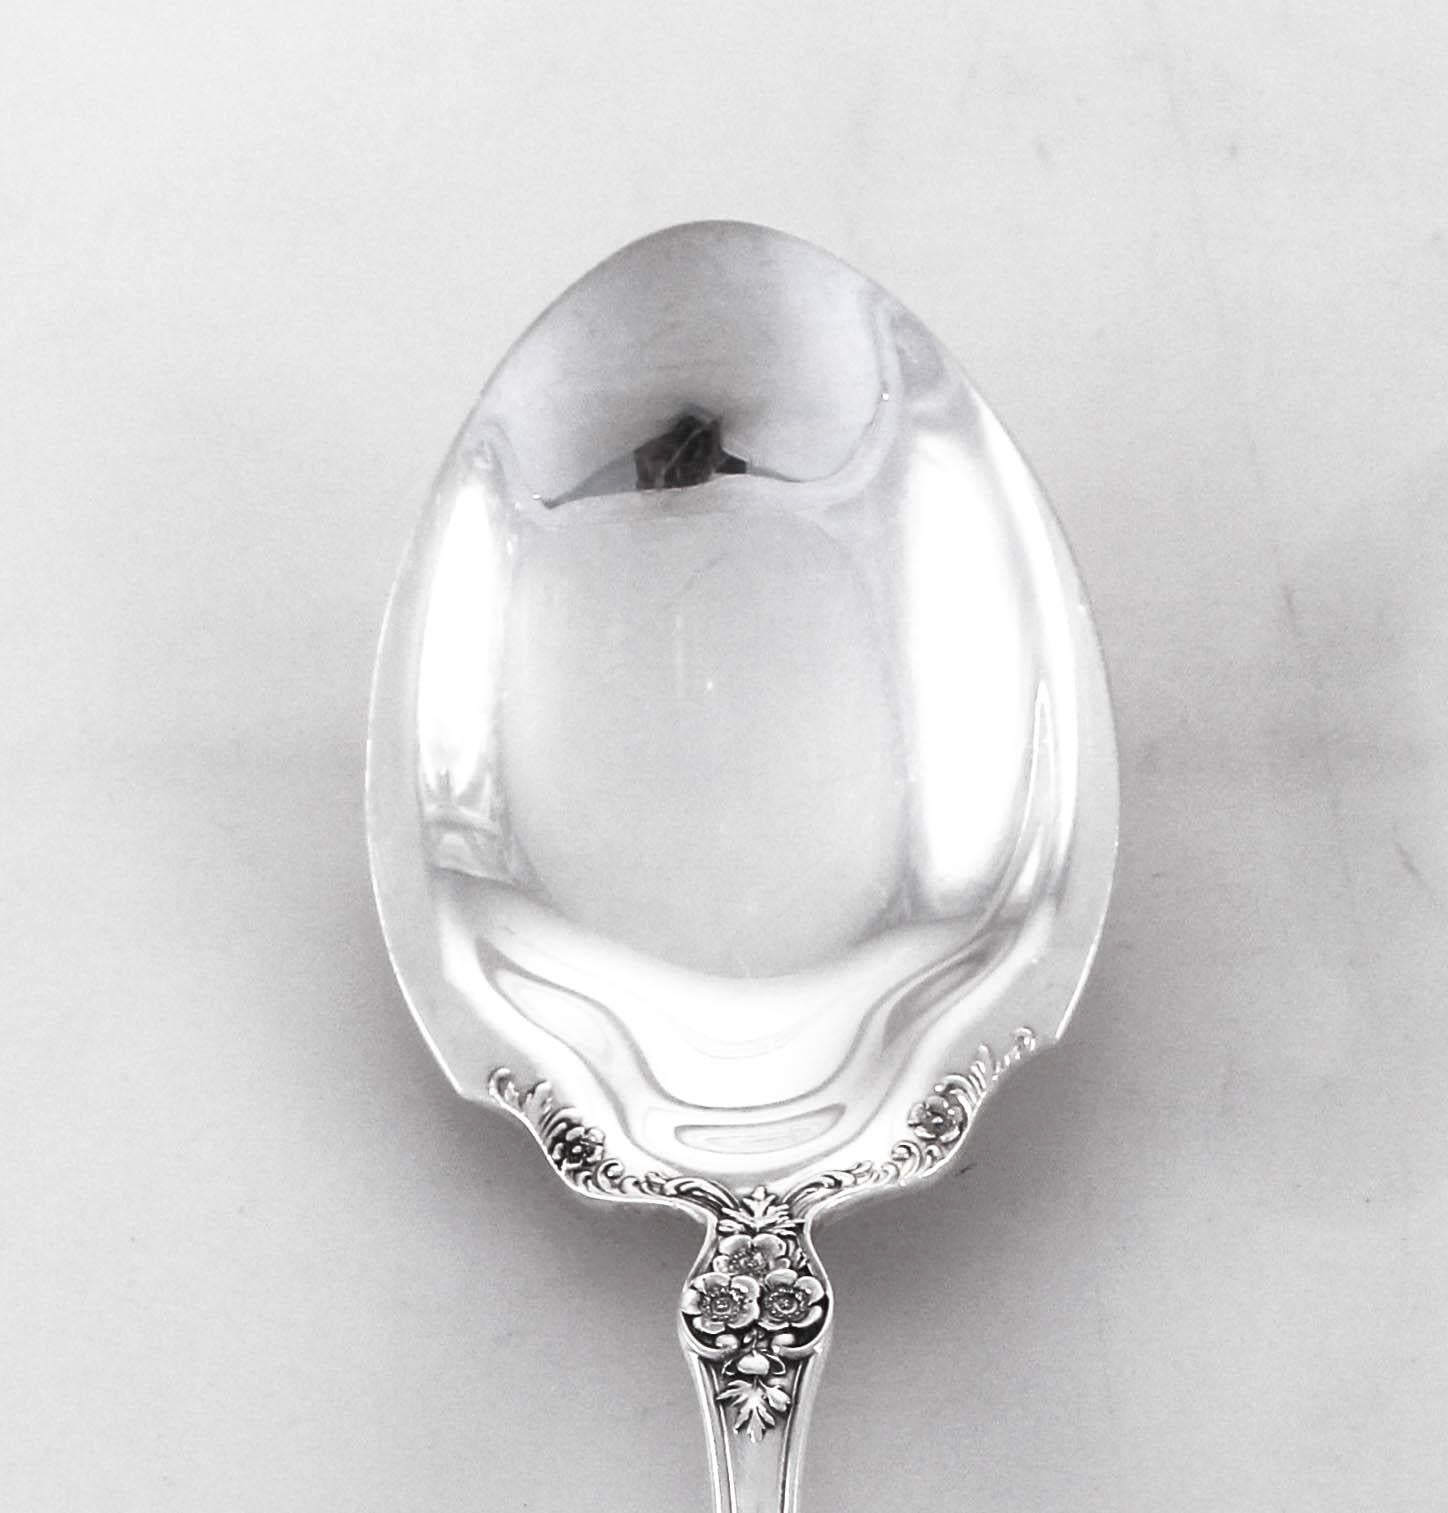 Buttercup by Gorham Silver Co., a lovely pattern that has been delighting customers for over one hundred years. This sterling silver serving spoon is not only beautiful but practical. Use it when serving dinner or desserts.